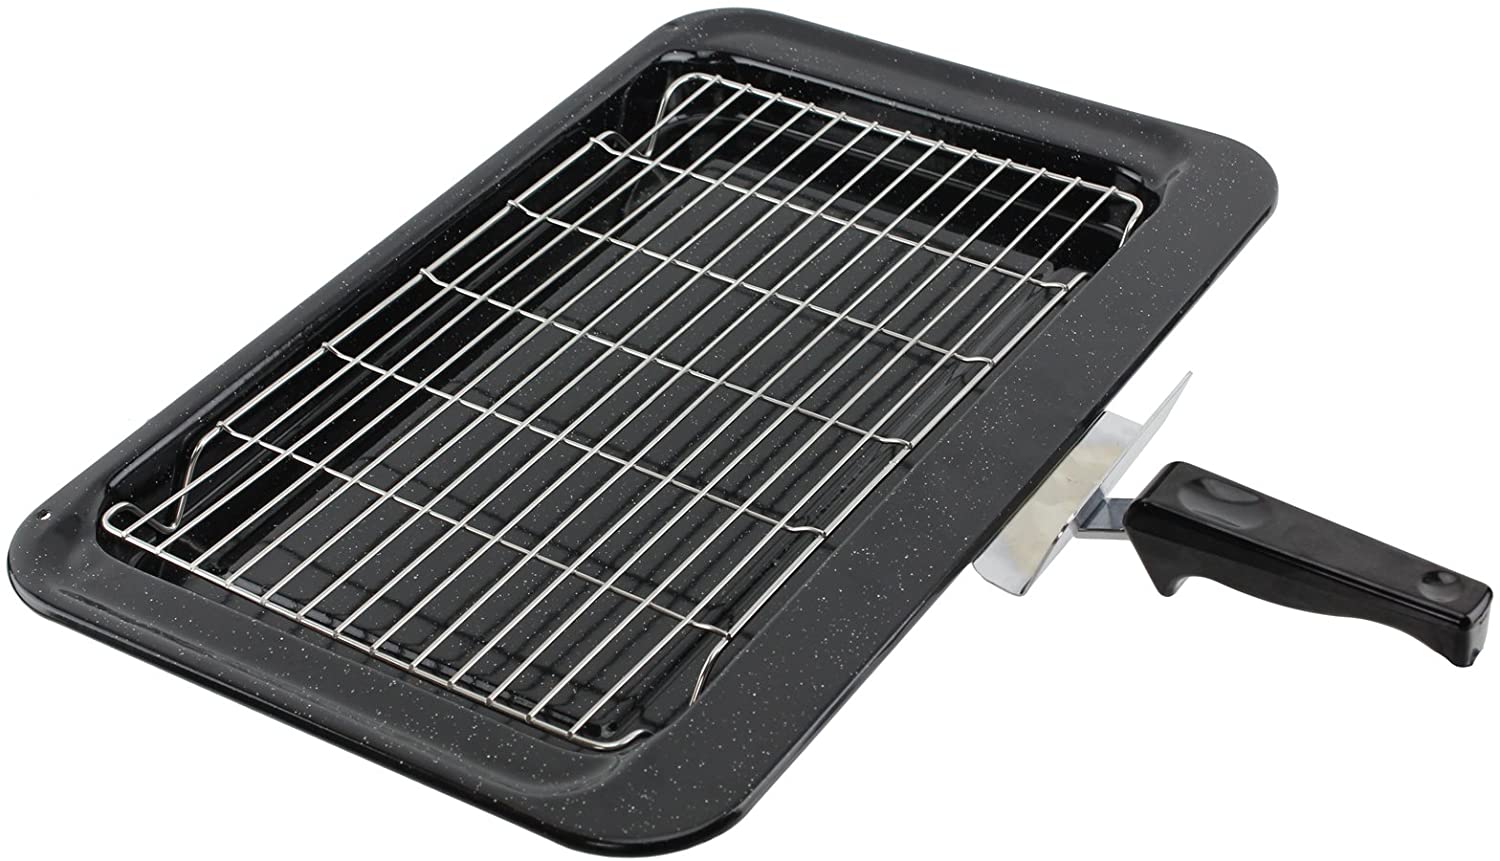 Enamel Grill Pan Tray Rack Grid Handle for Maytag Oven Cooker 445 x 276 mm